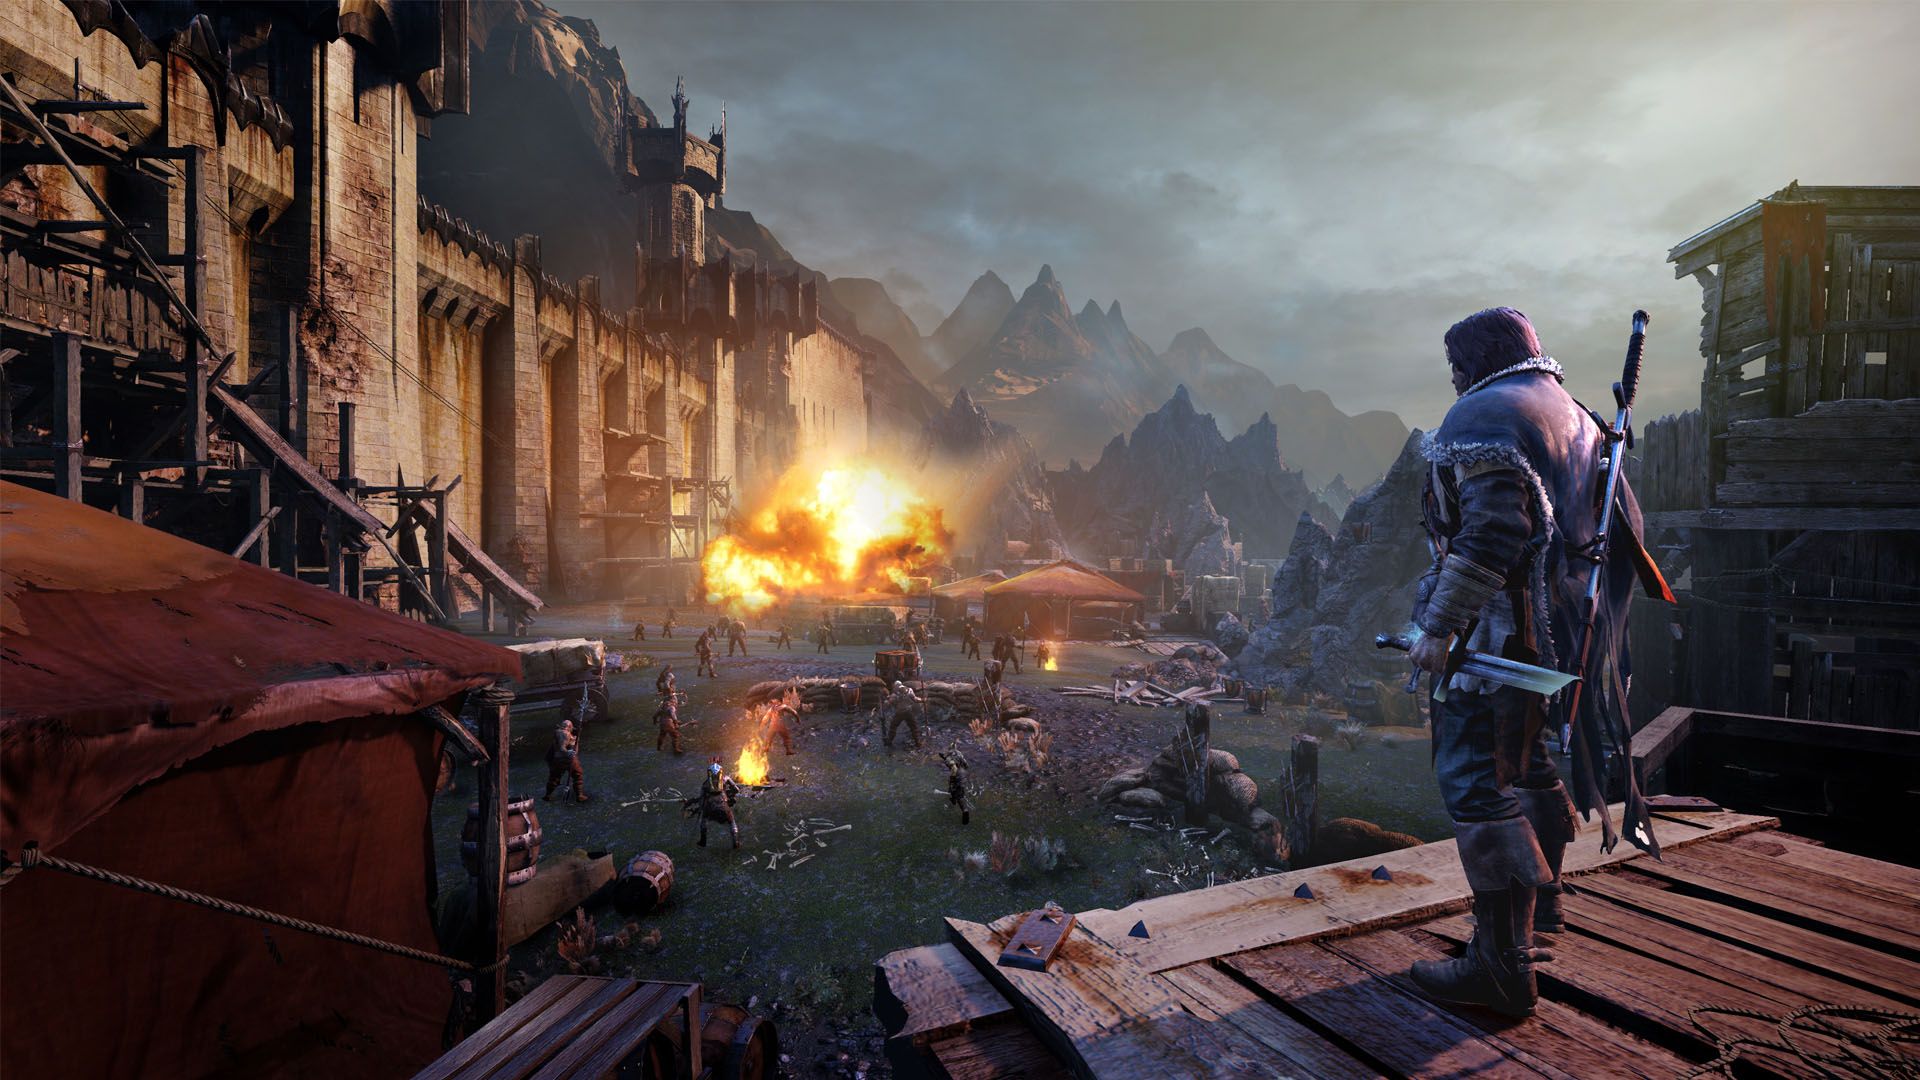 Middle-earth: Shadow of Mordor - HD Content Featured Screenshot #1